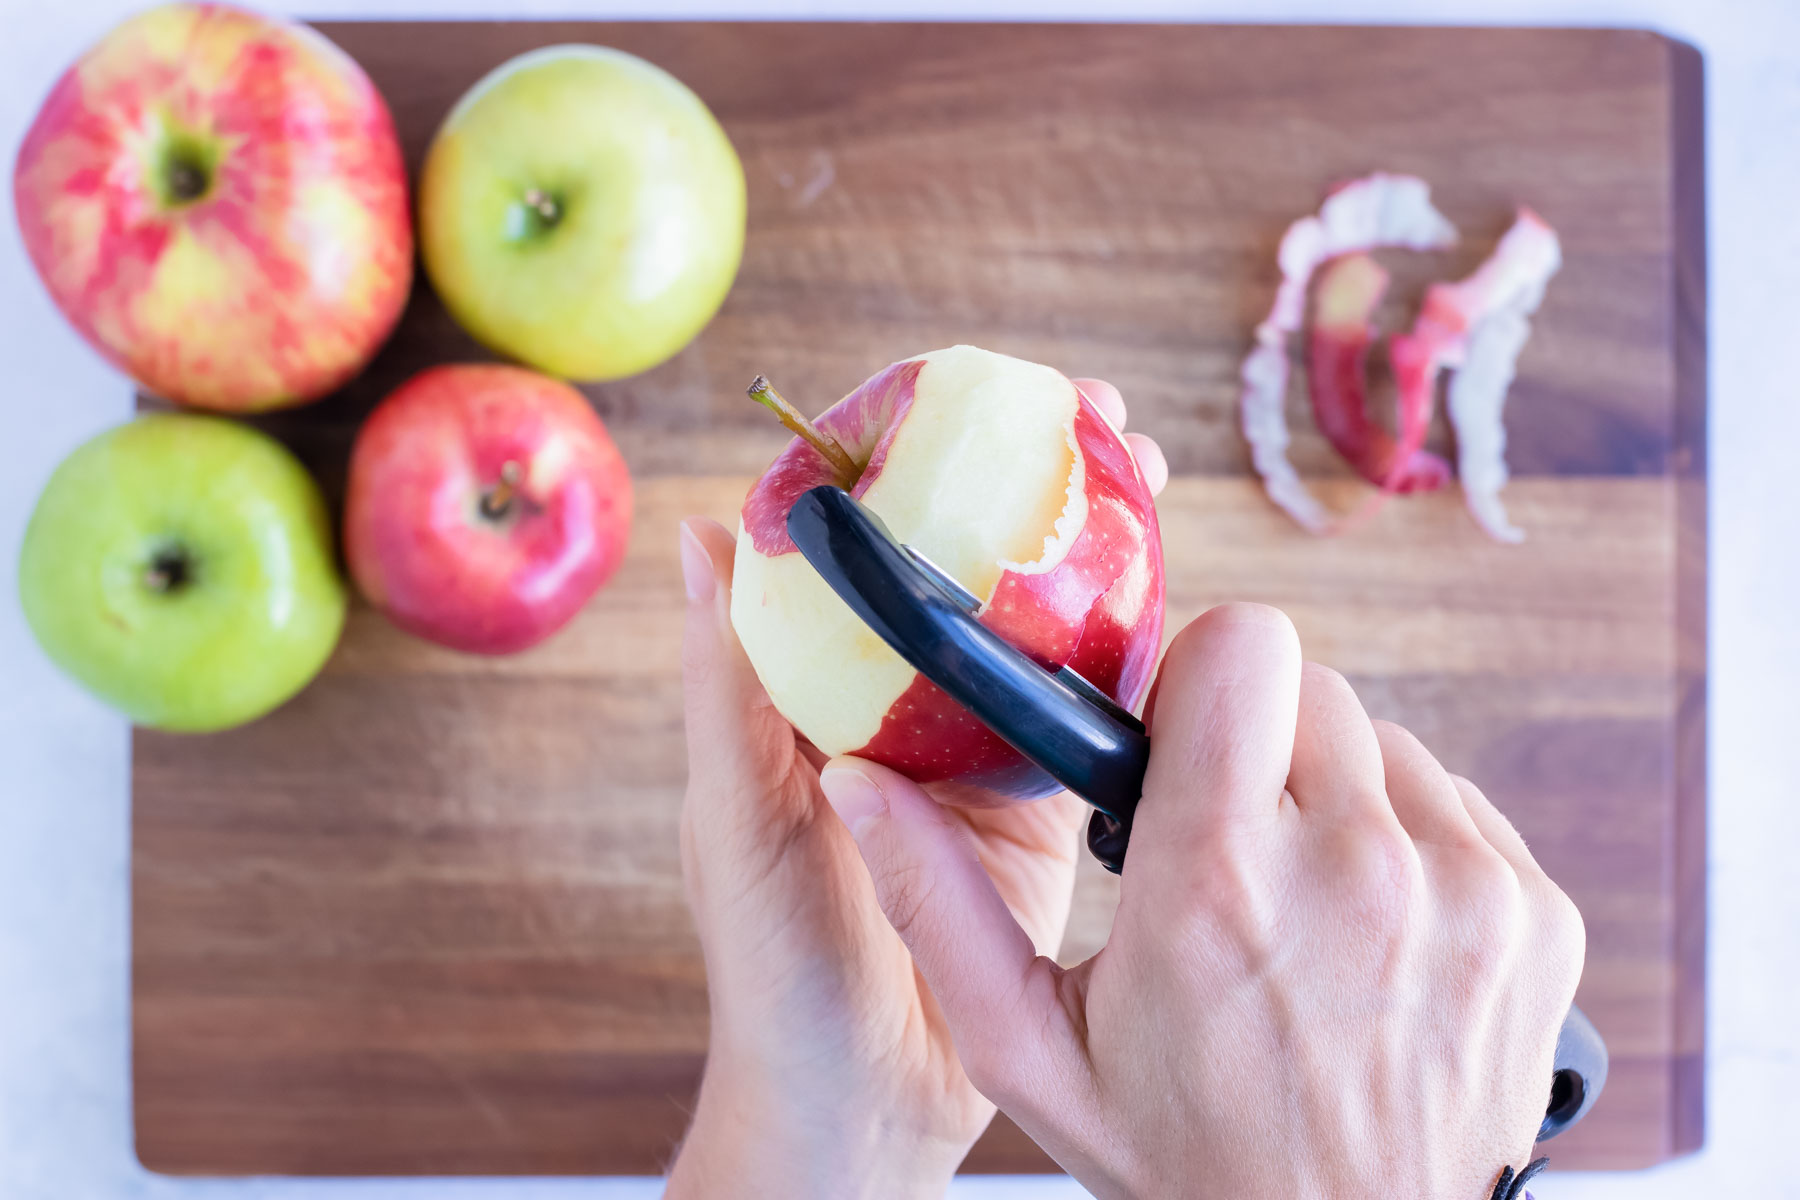 Use a vegetable peeler to peel apples before slicing for the best homemade applesauce.